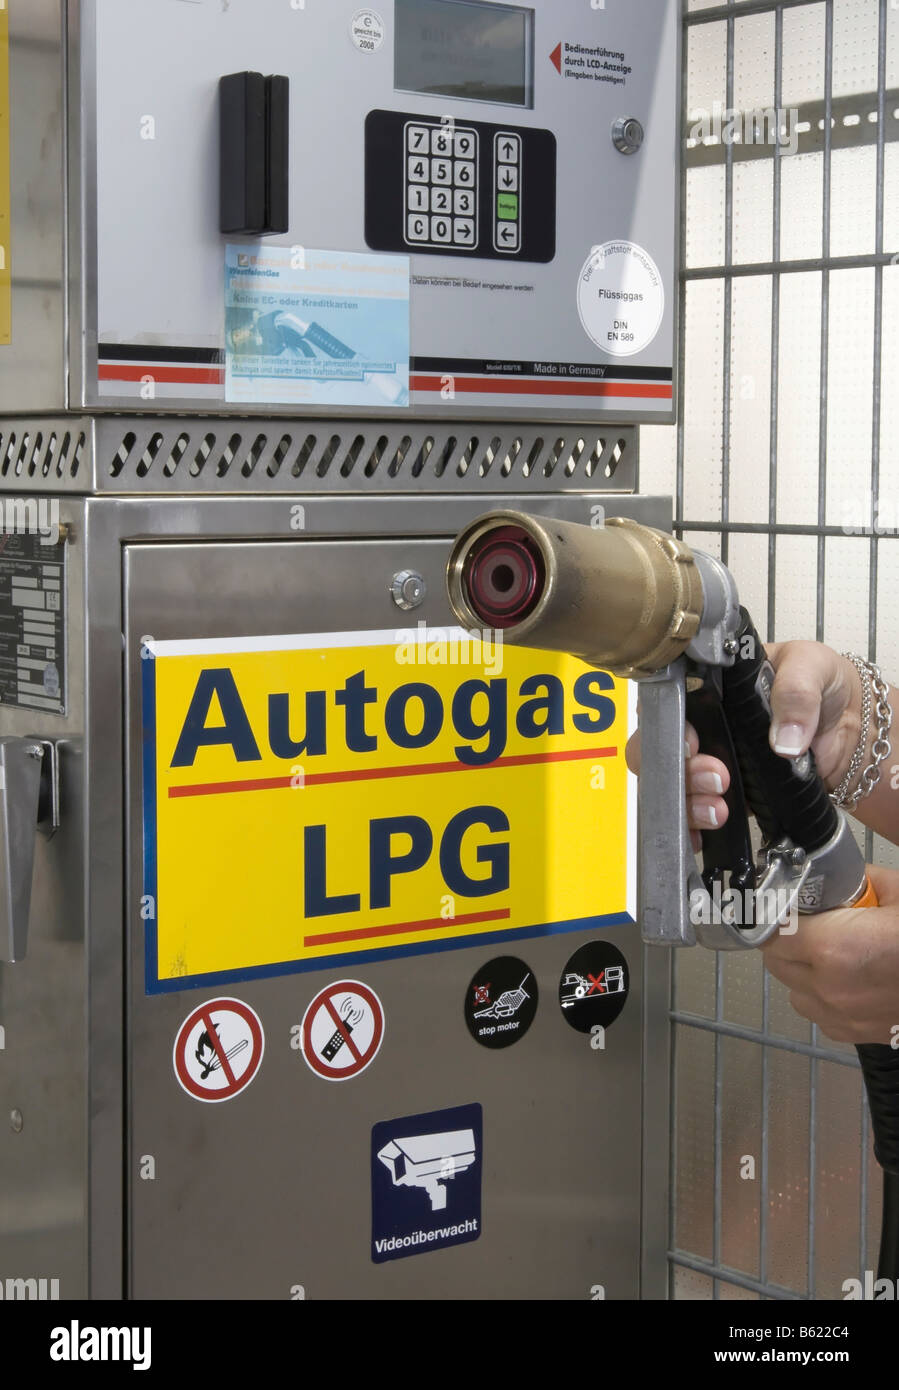 Gas pump, gas station for liquefied petroleum gas or LPG, Germany Stock Photo